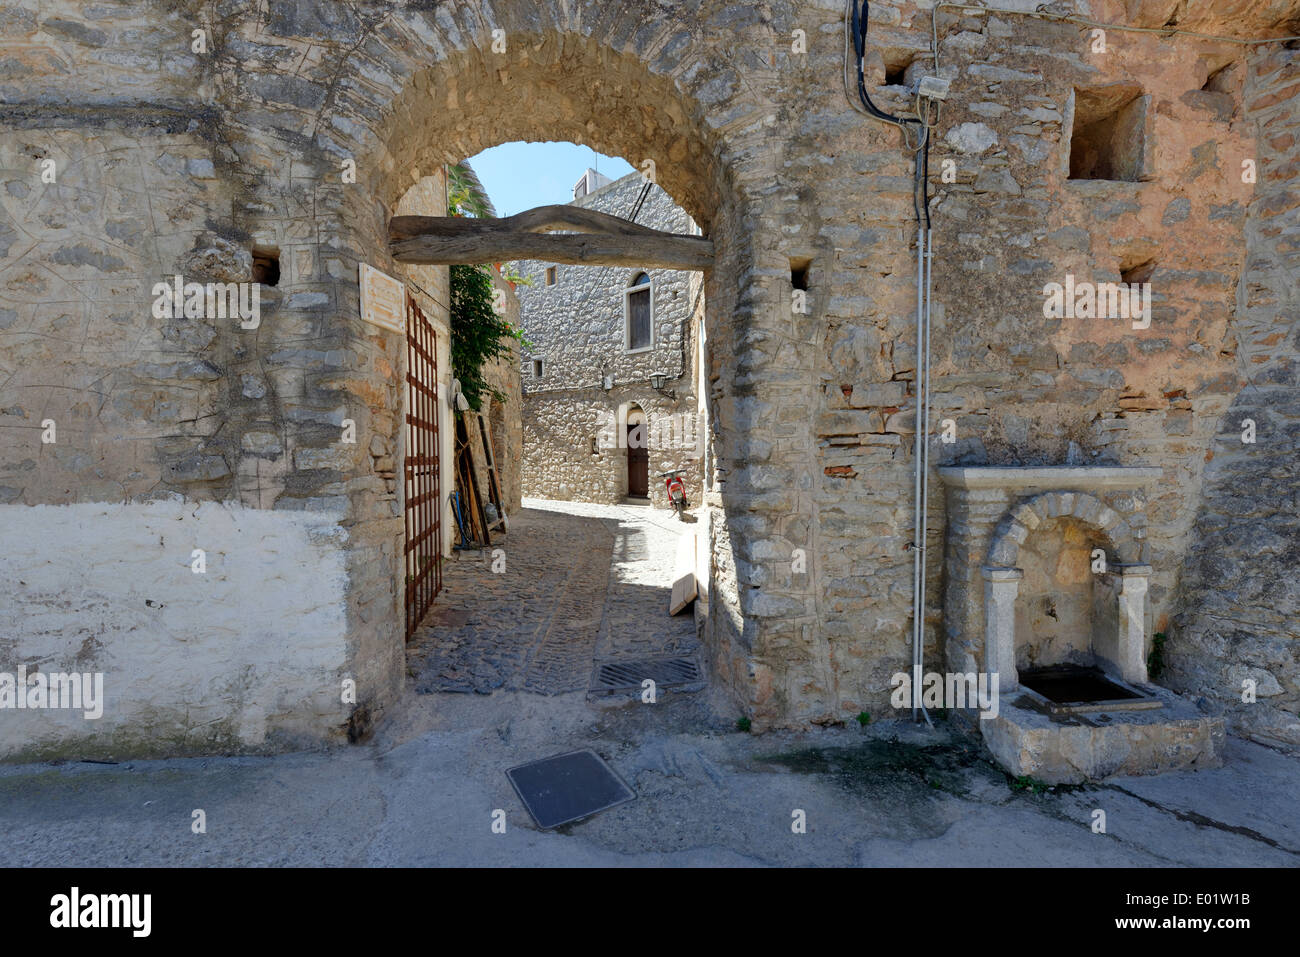 North West town gateway with original Iron Gate Medieval town Mesta Chios Greece shape fortifications town Stock Photo